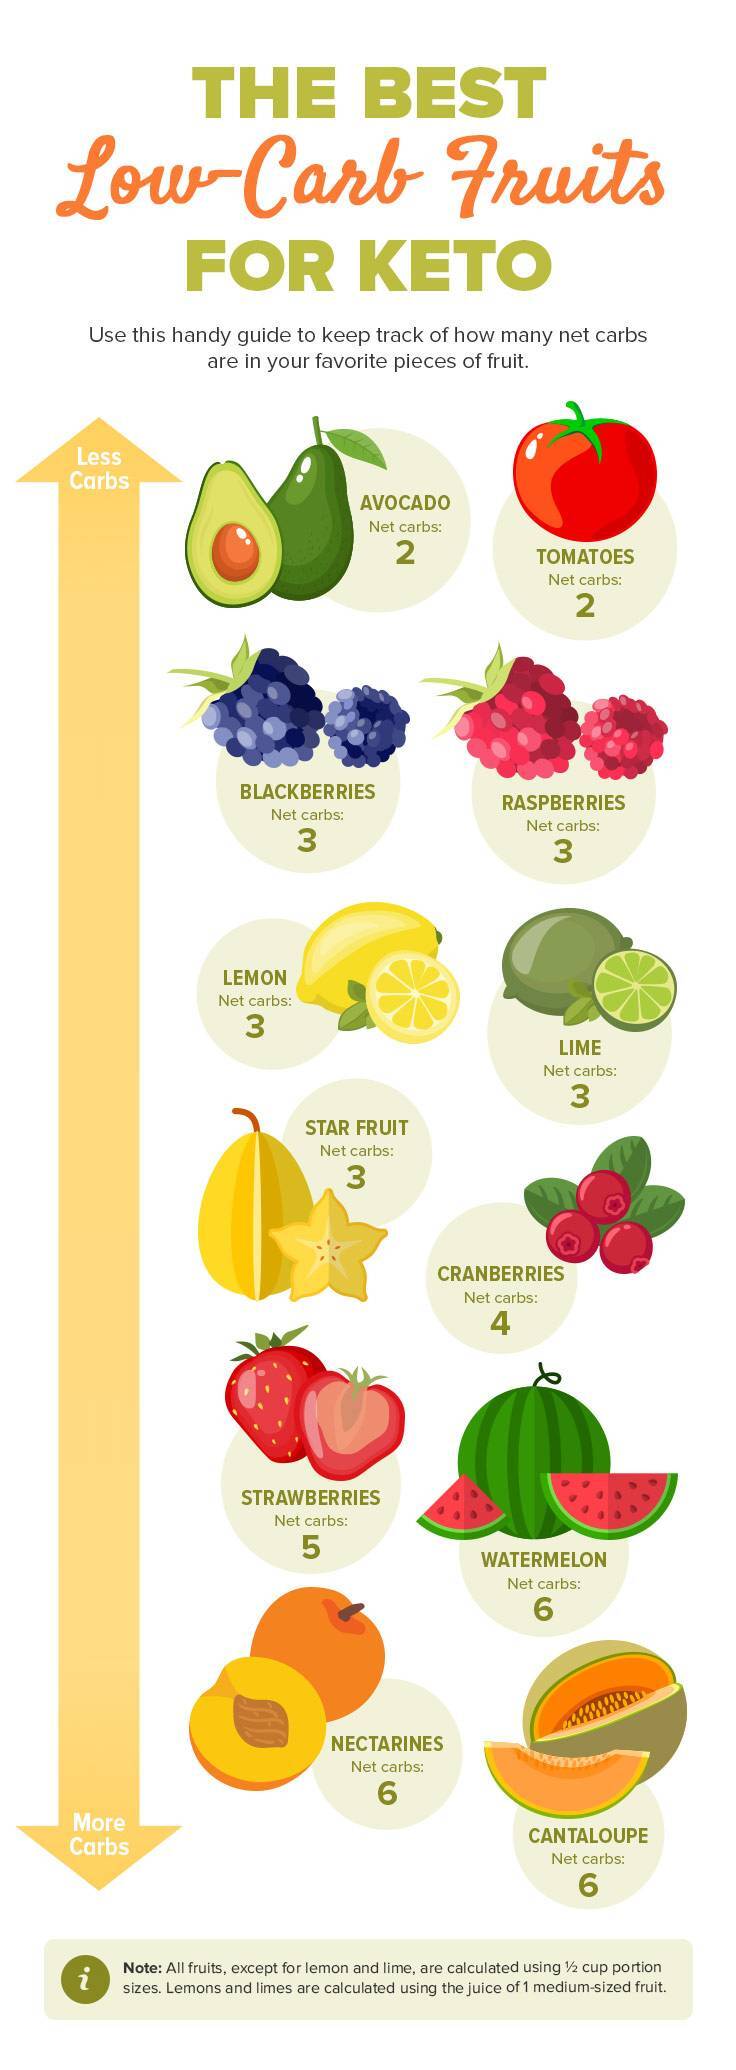 Best Low-Carb Fruits for Keto